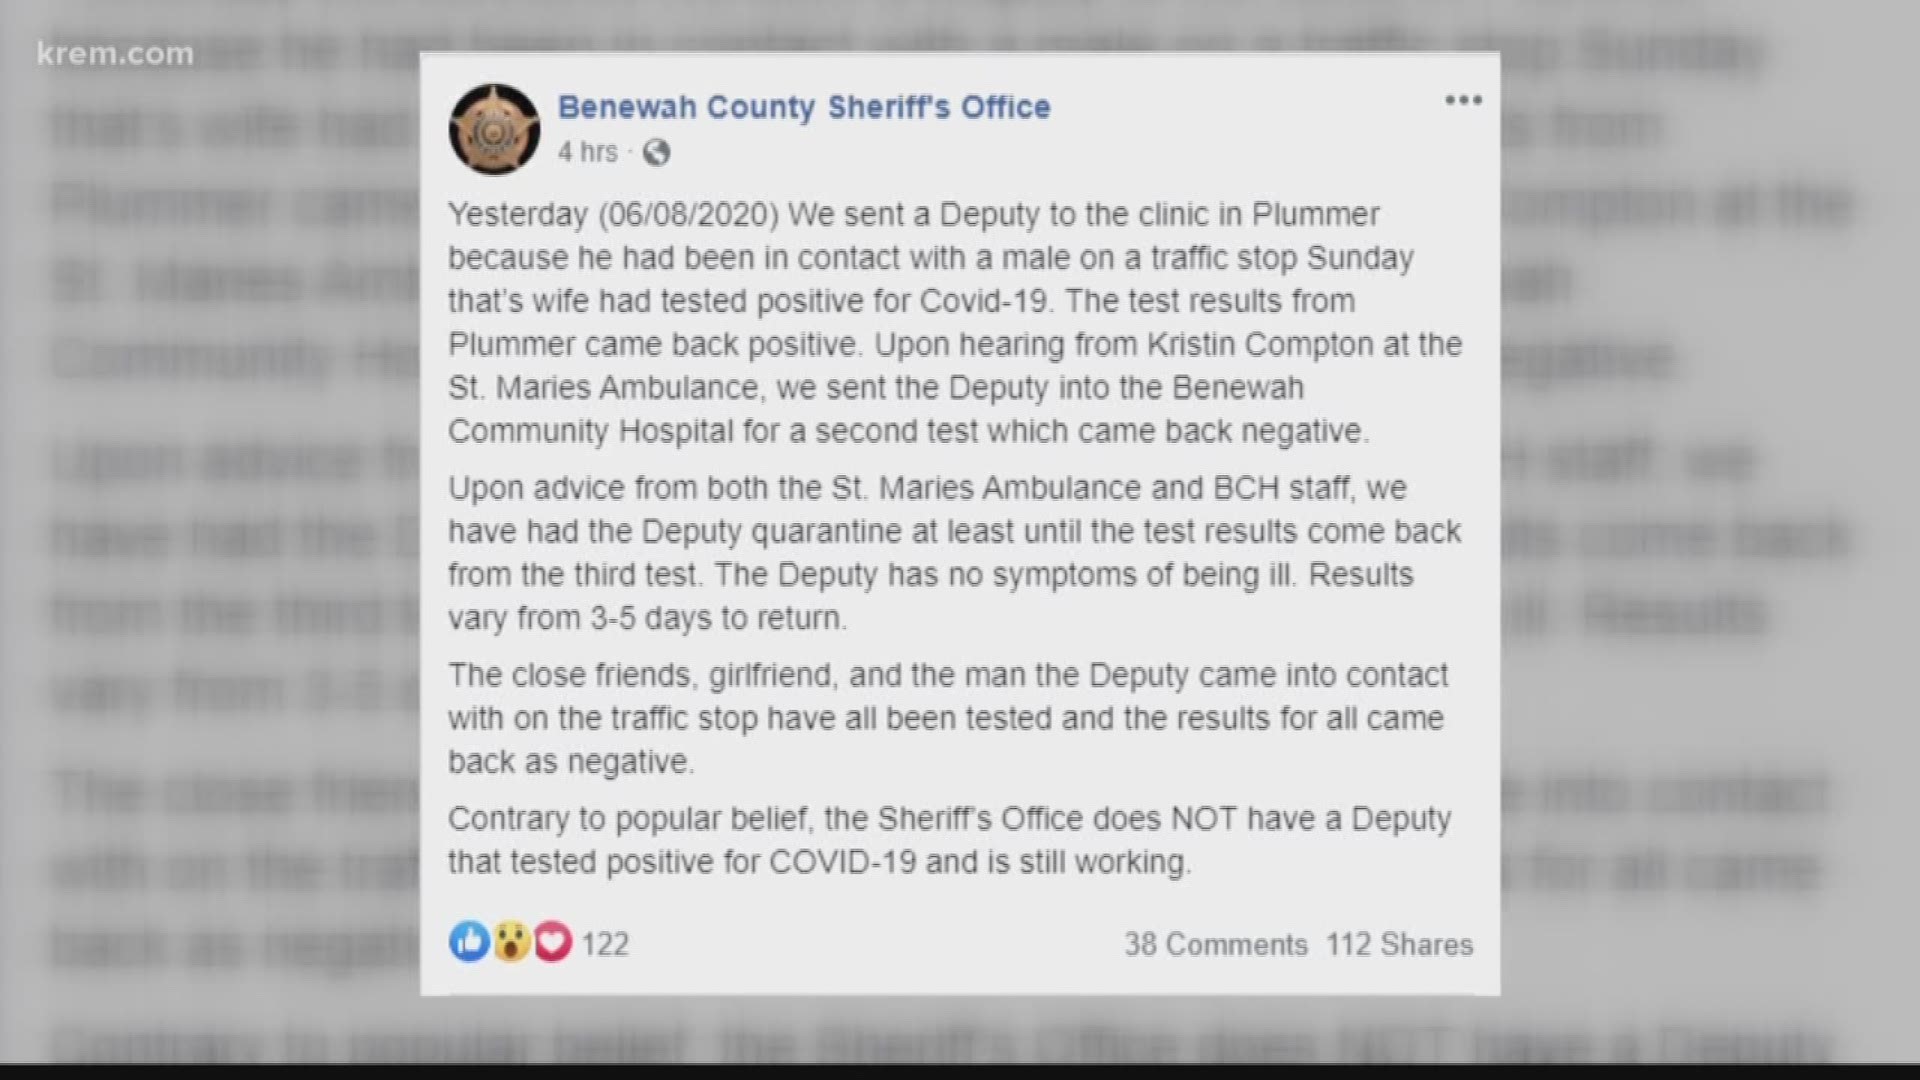 The Benewah County Sheriff's Office wrote on Facebook that one of its deputies is in quarantine after possible exposure to COVID-19.